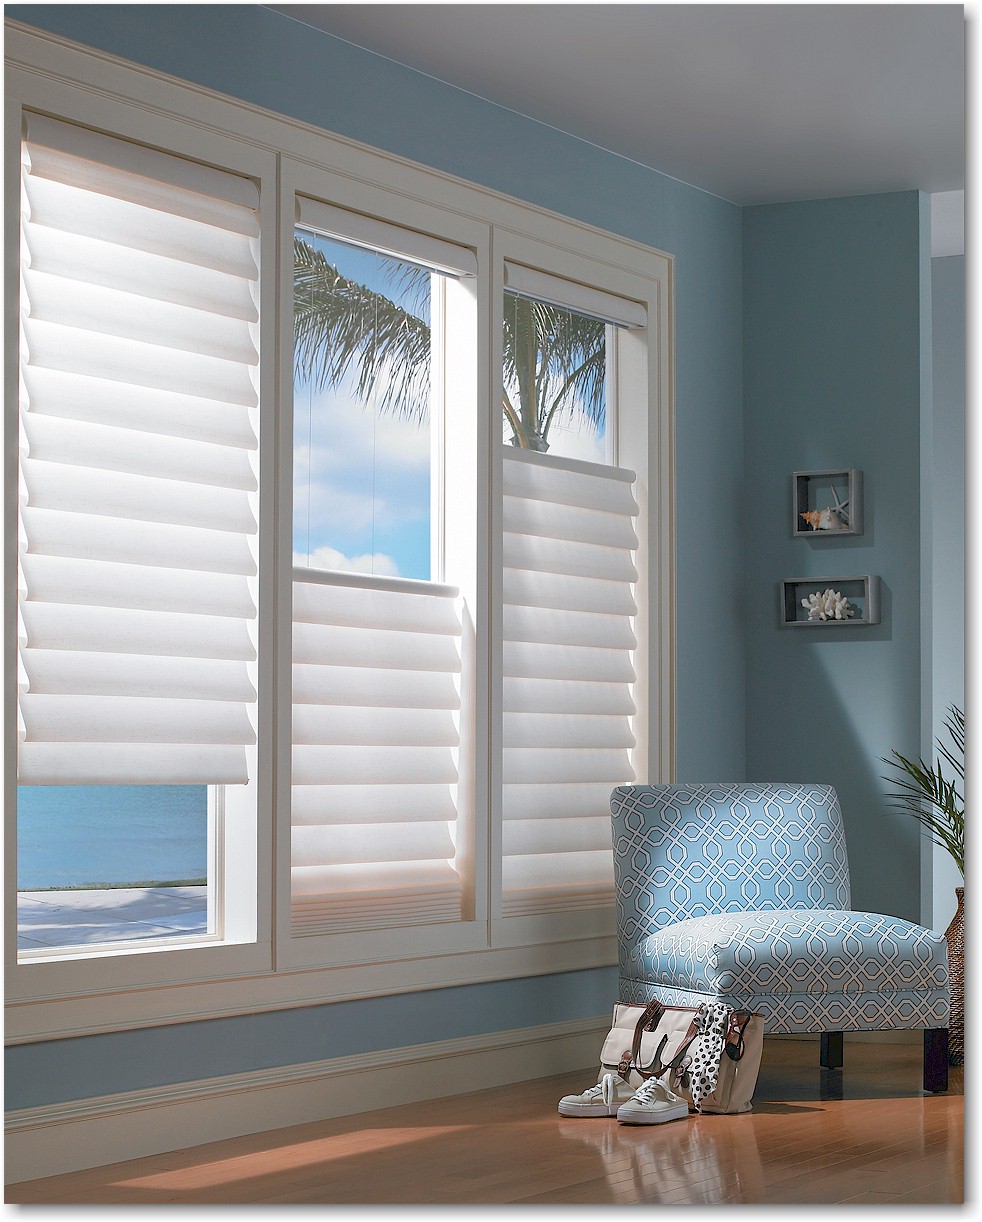 Window shades are adjustable and provide privacy and protection